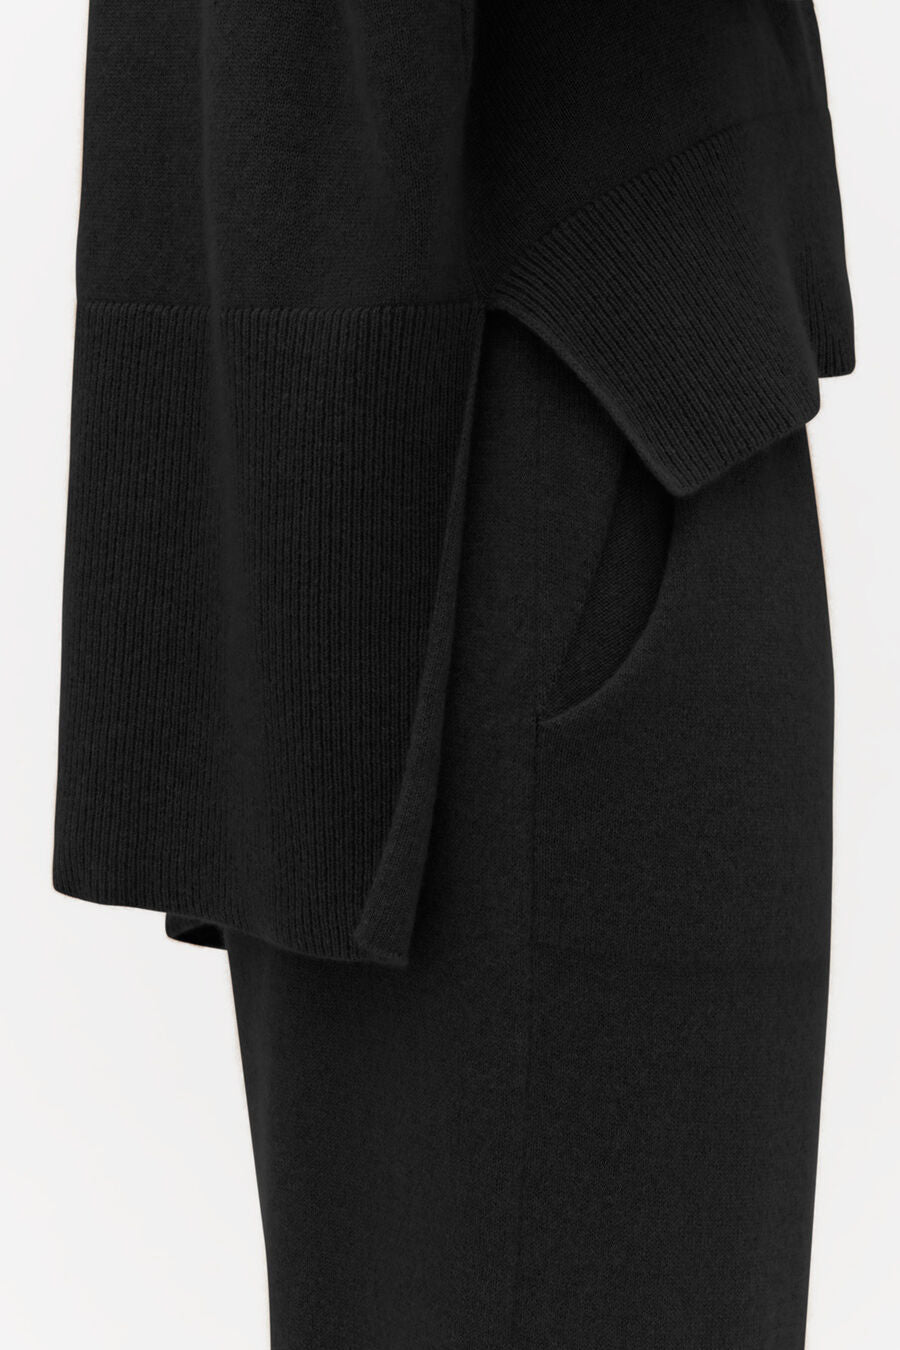 Close-up of a sweater with ribbed cuffs and a coat over trousers.